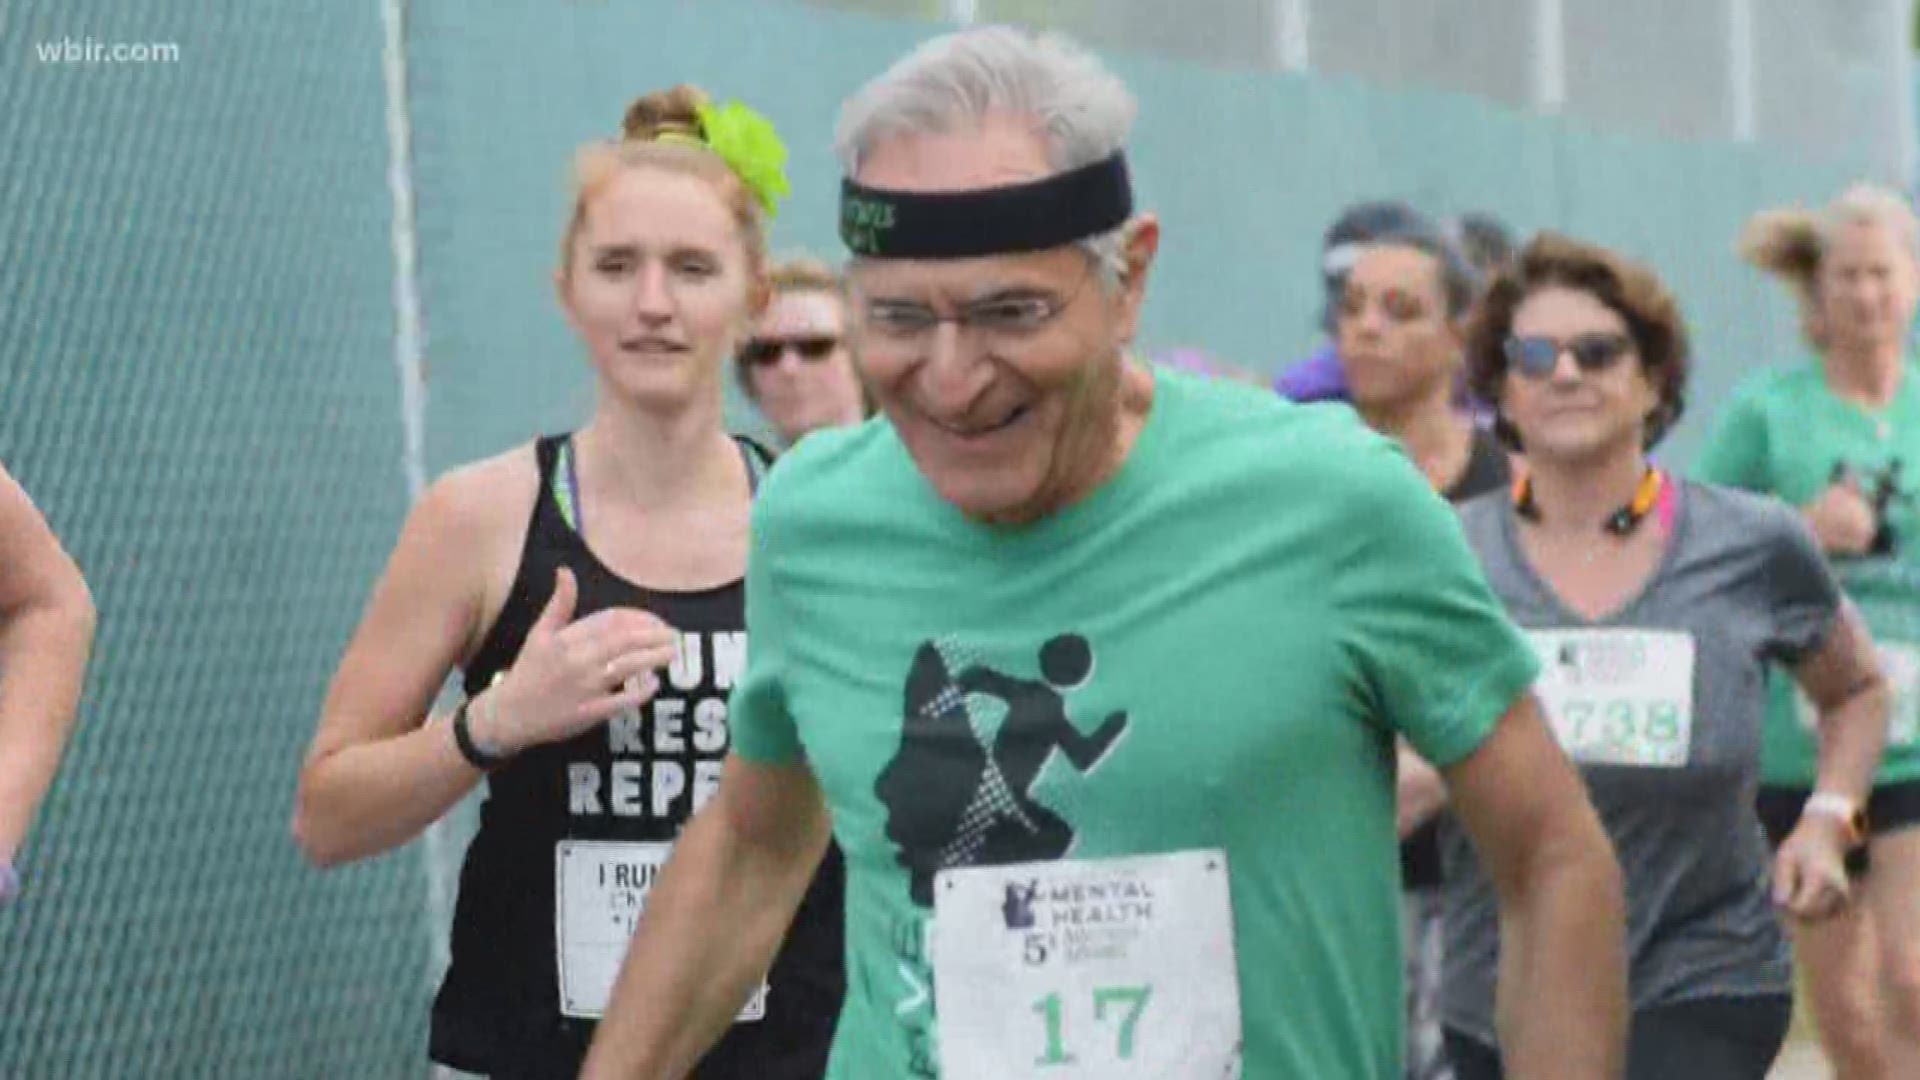 A retired doctor has made it his mission to shine a light on mental health by traveling to every state in the U.S.  In each state, he hosts a group-5k run for anyone who wants to join.